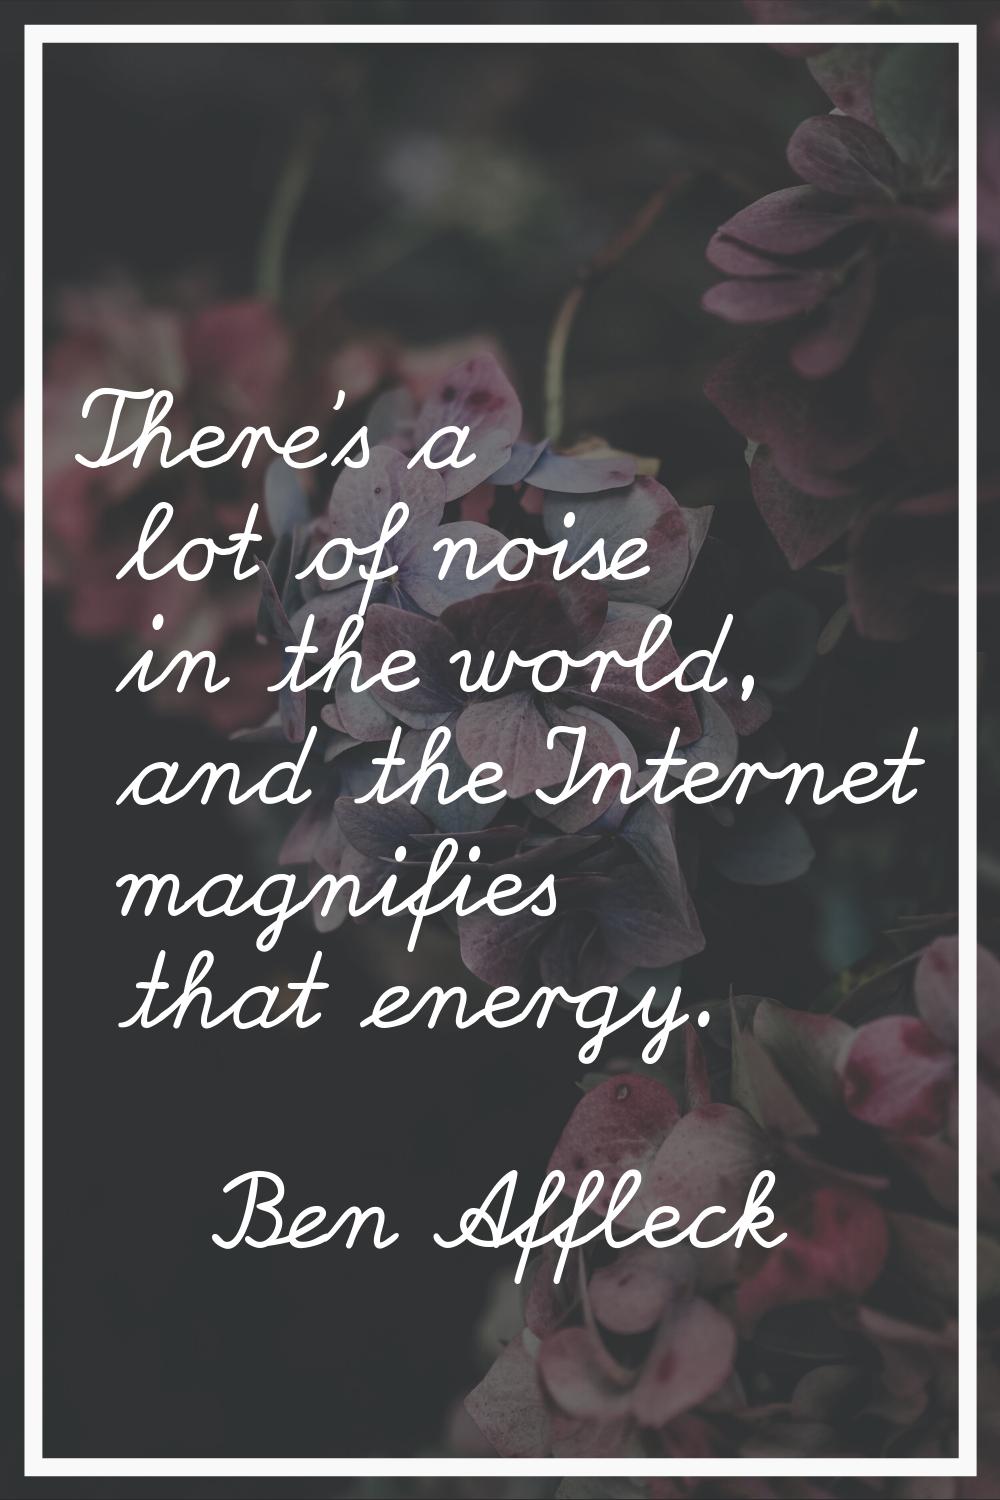 There's a lot of noise in the world, and the Internet magnifies that energy.